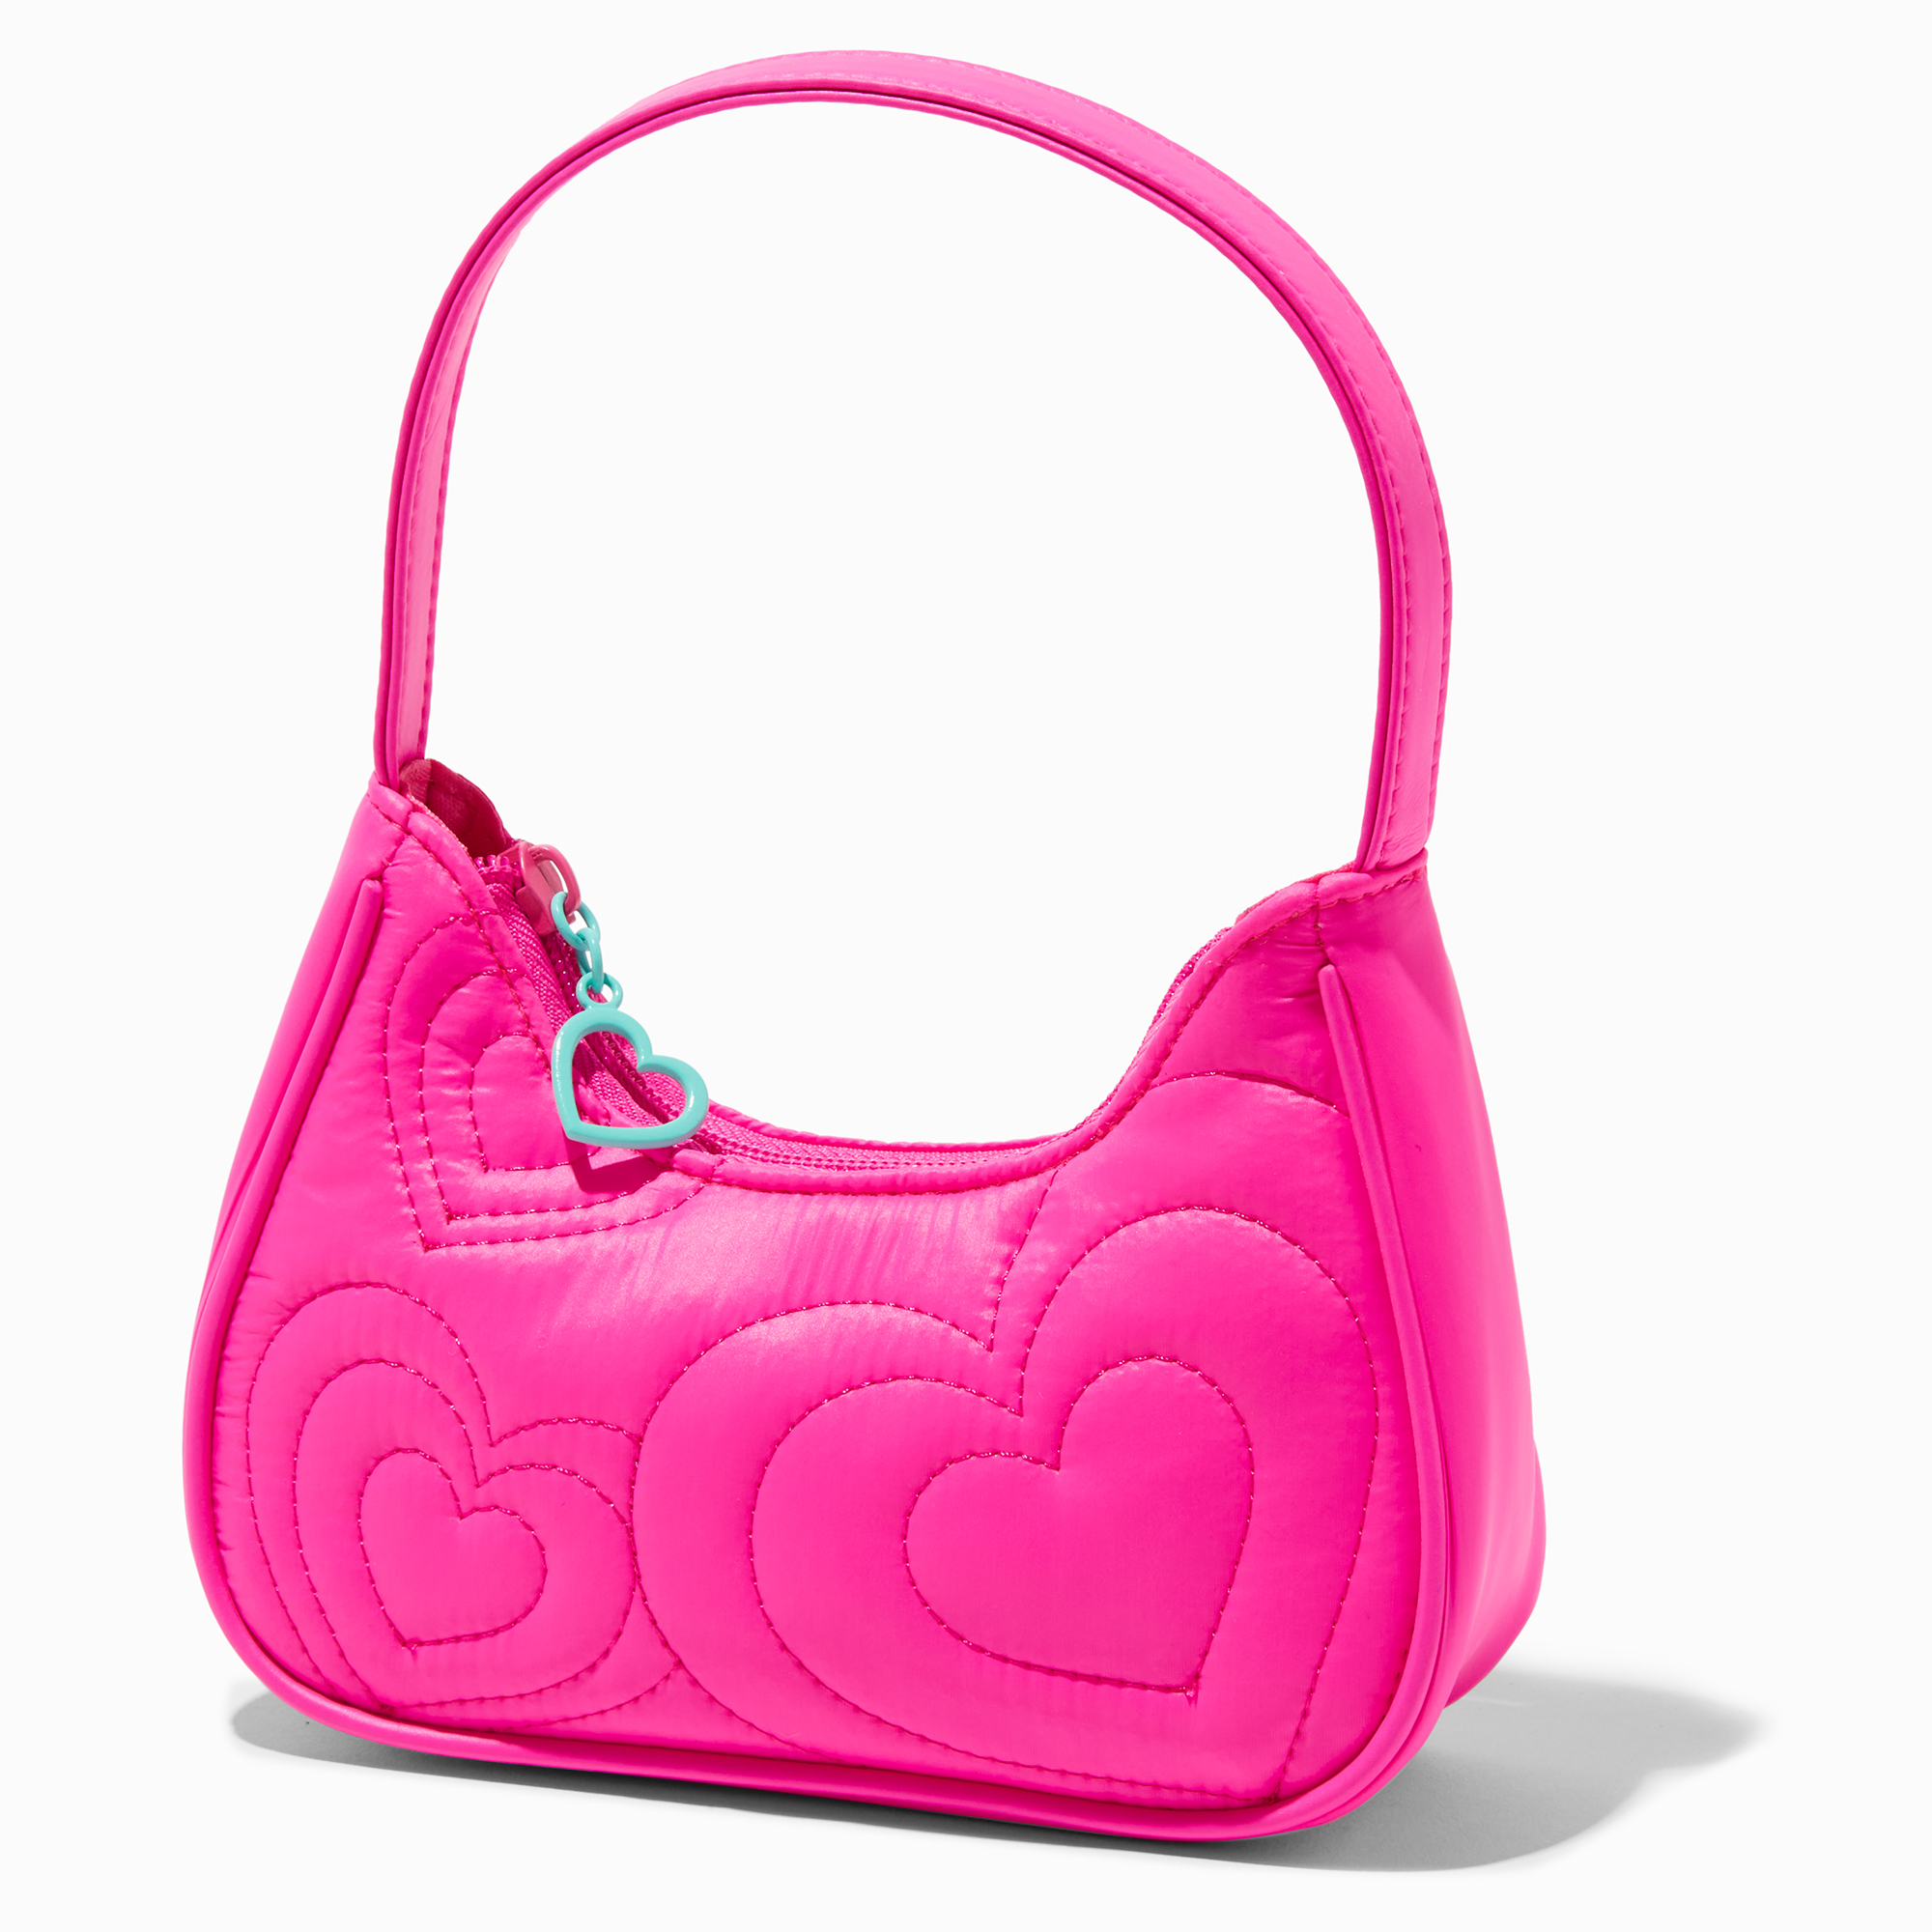 Hand-painted Variety Of Girls Handbags, Bag, Hand Bag, Purse PNG Image And  Clipart Image For Free Download - Lovepik | 610284378